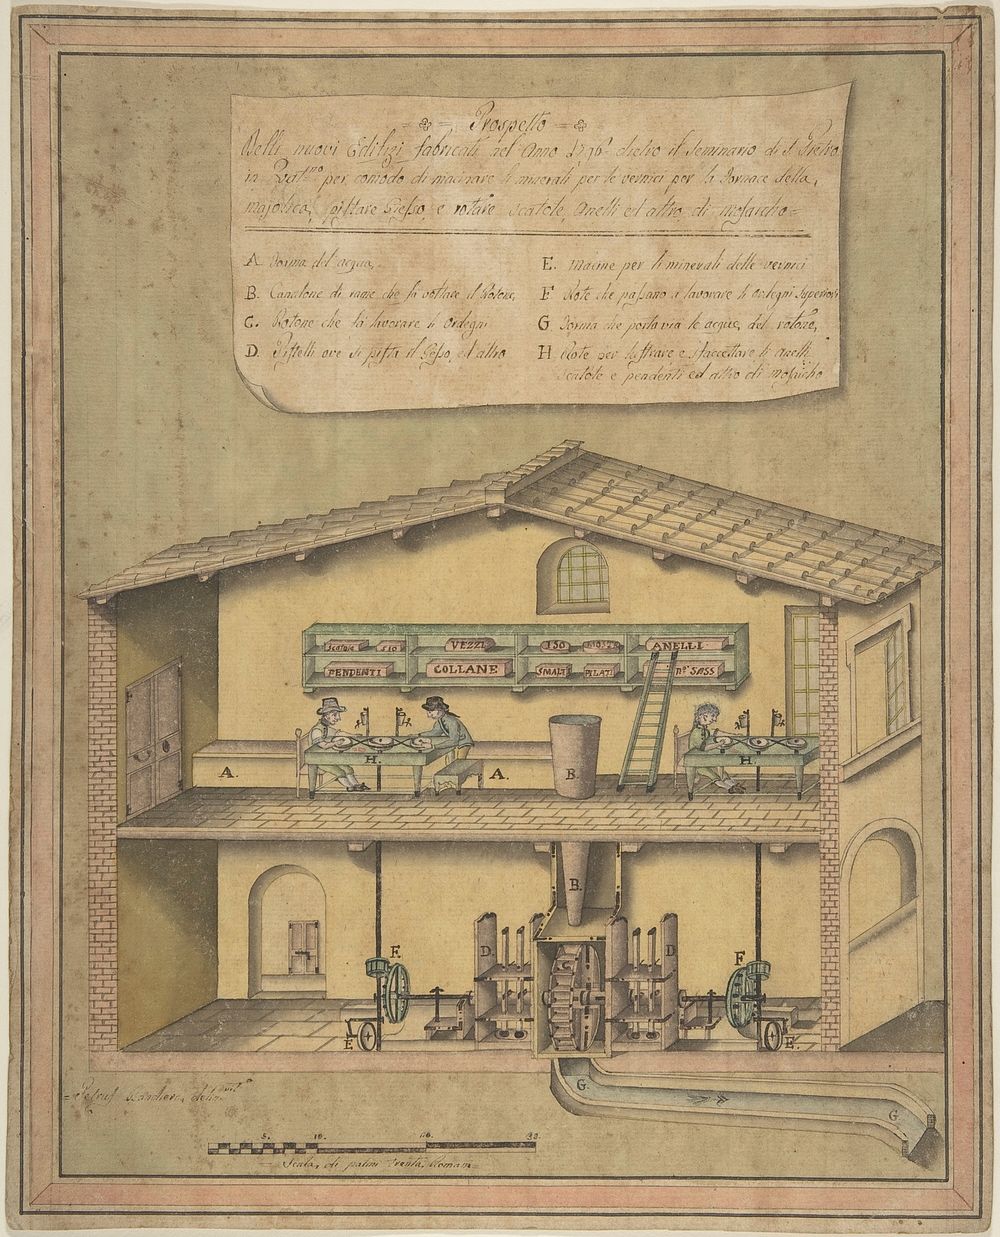 Project for the New Buildings Erected in the Year 1796 behind the Cemetries of St. Peter by Pietro Bandiera